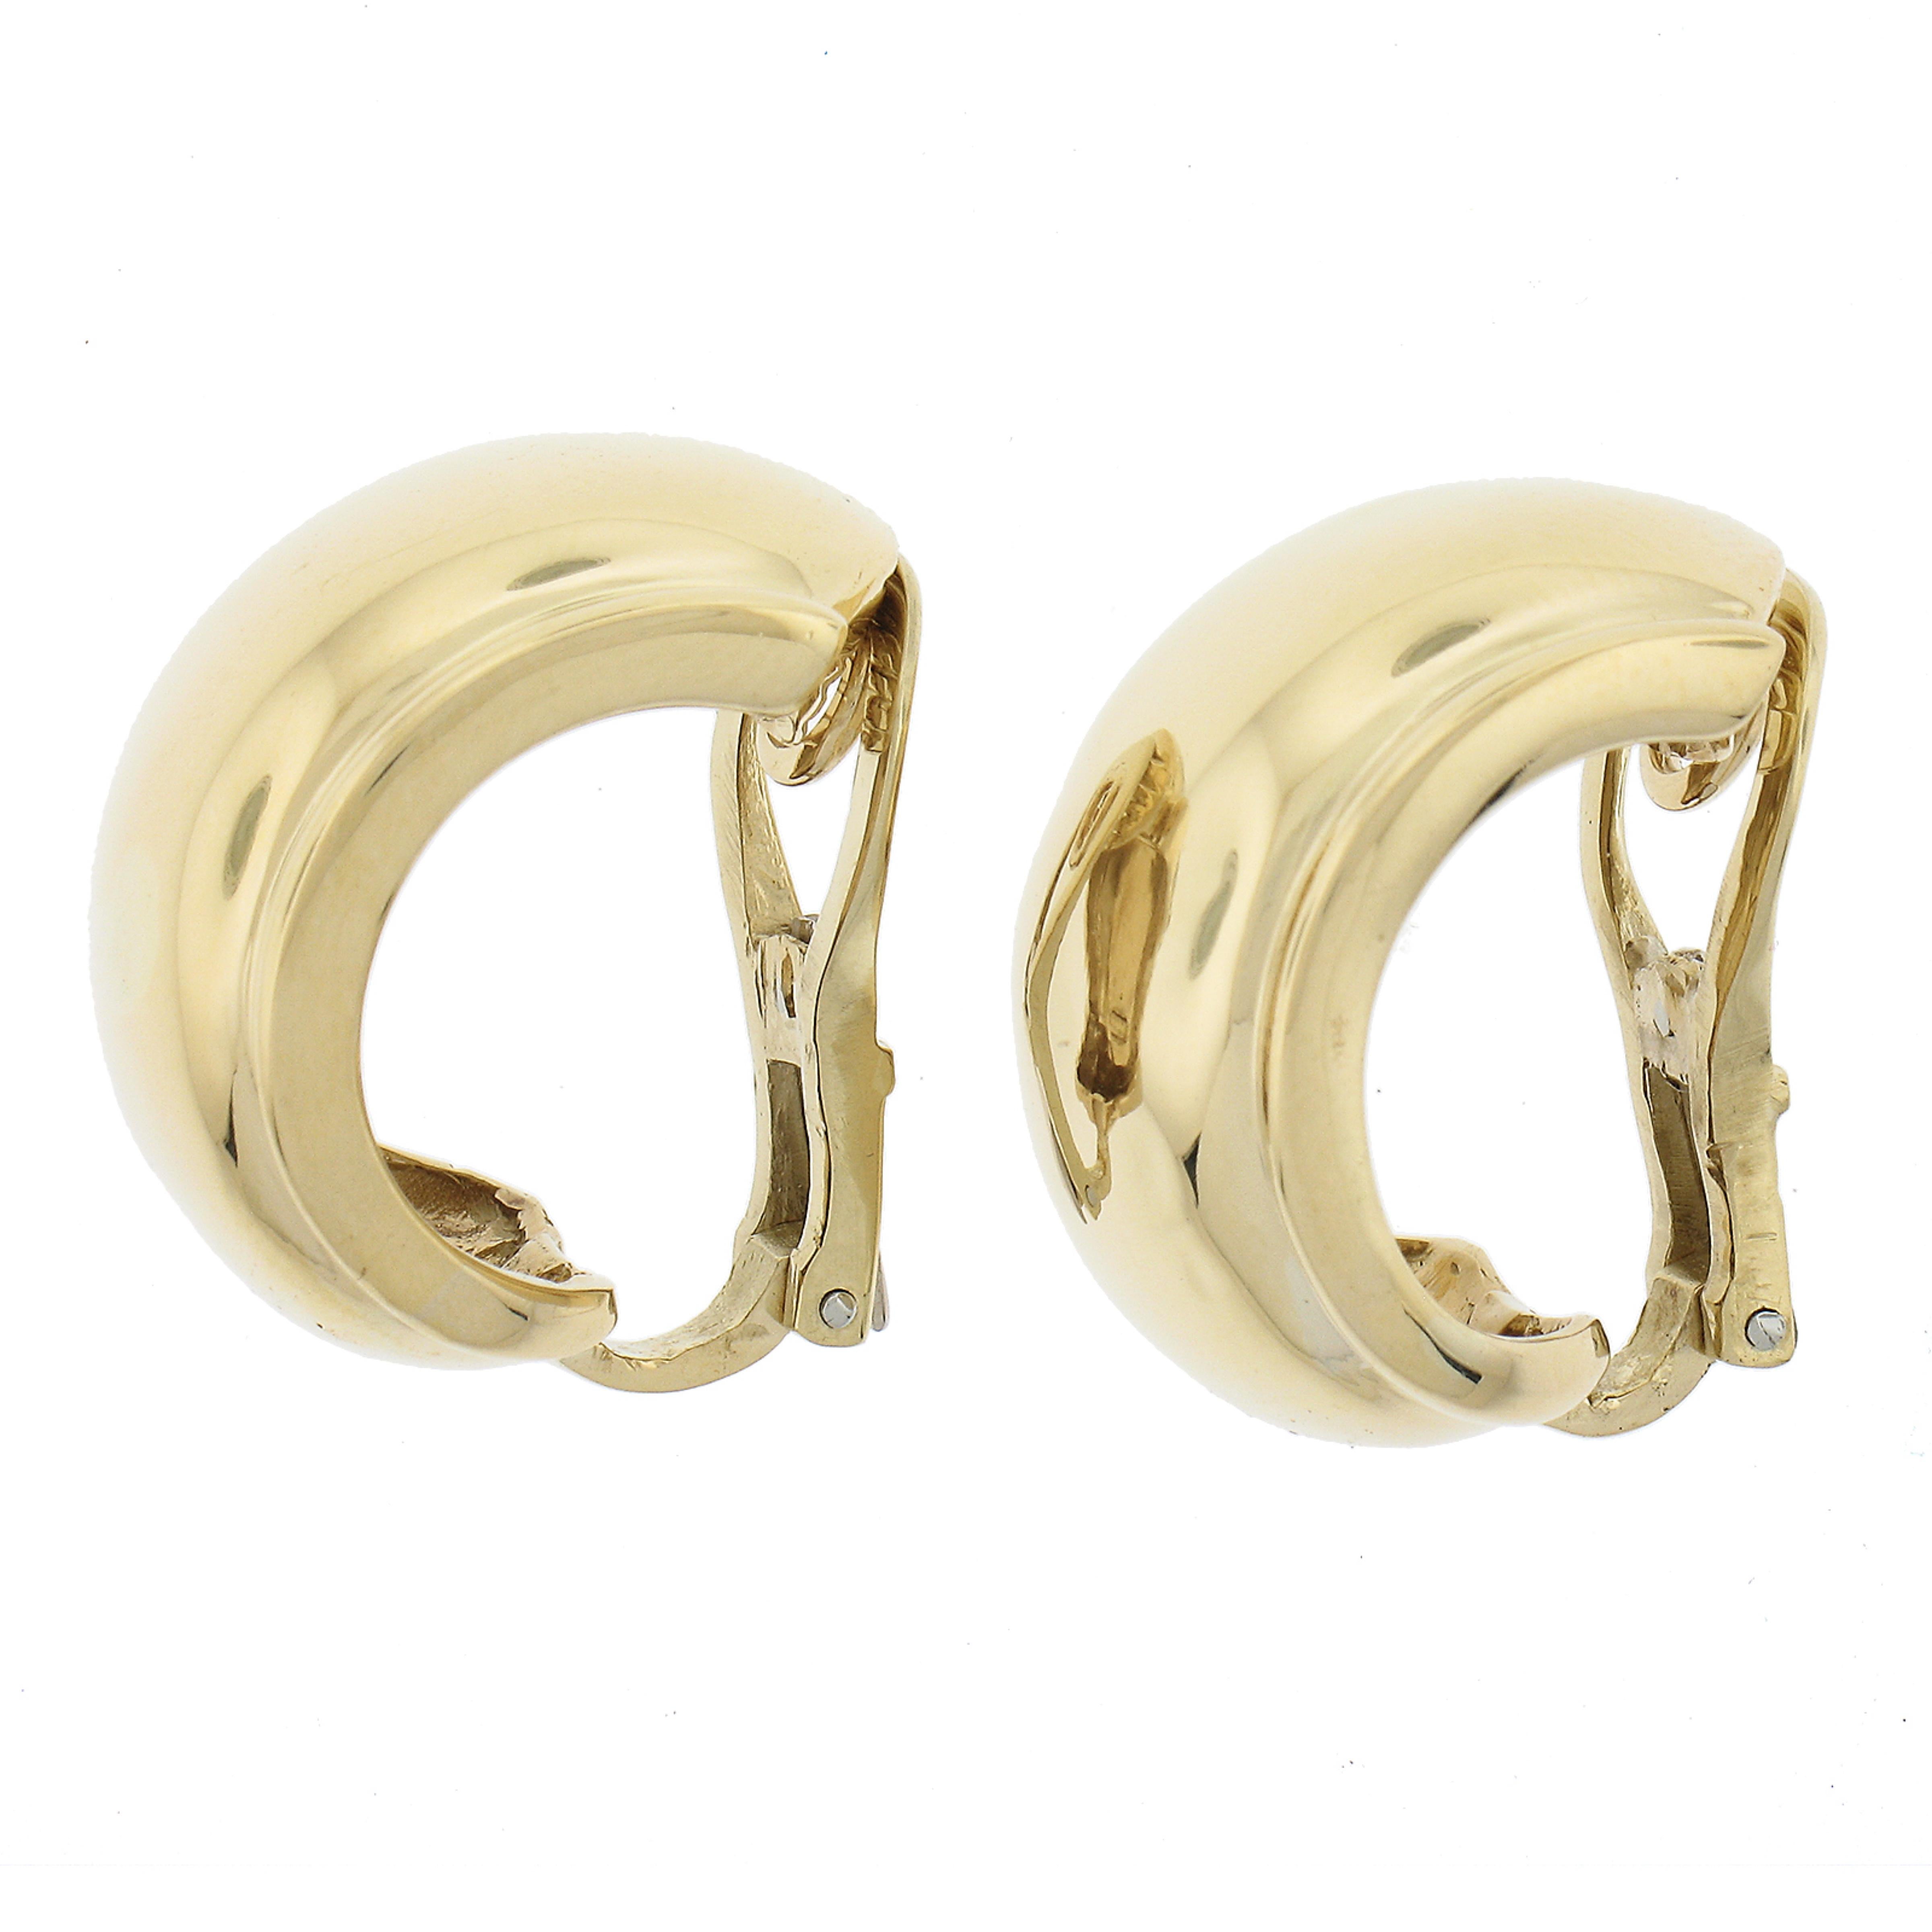 Vintage Tiffany & Co. 18K Yellow Gold Polished Domed Wide Cuff Clip On Earrings In Excellent Condition For Sale In Montclair, NJ